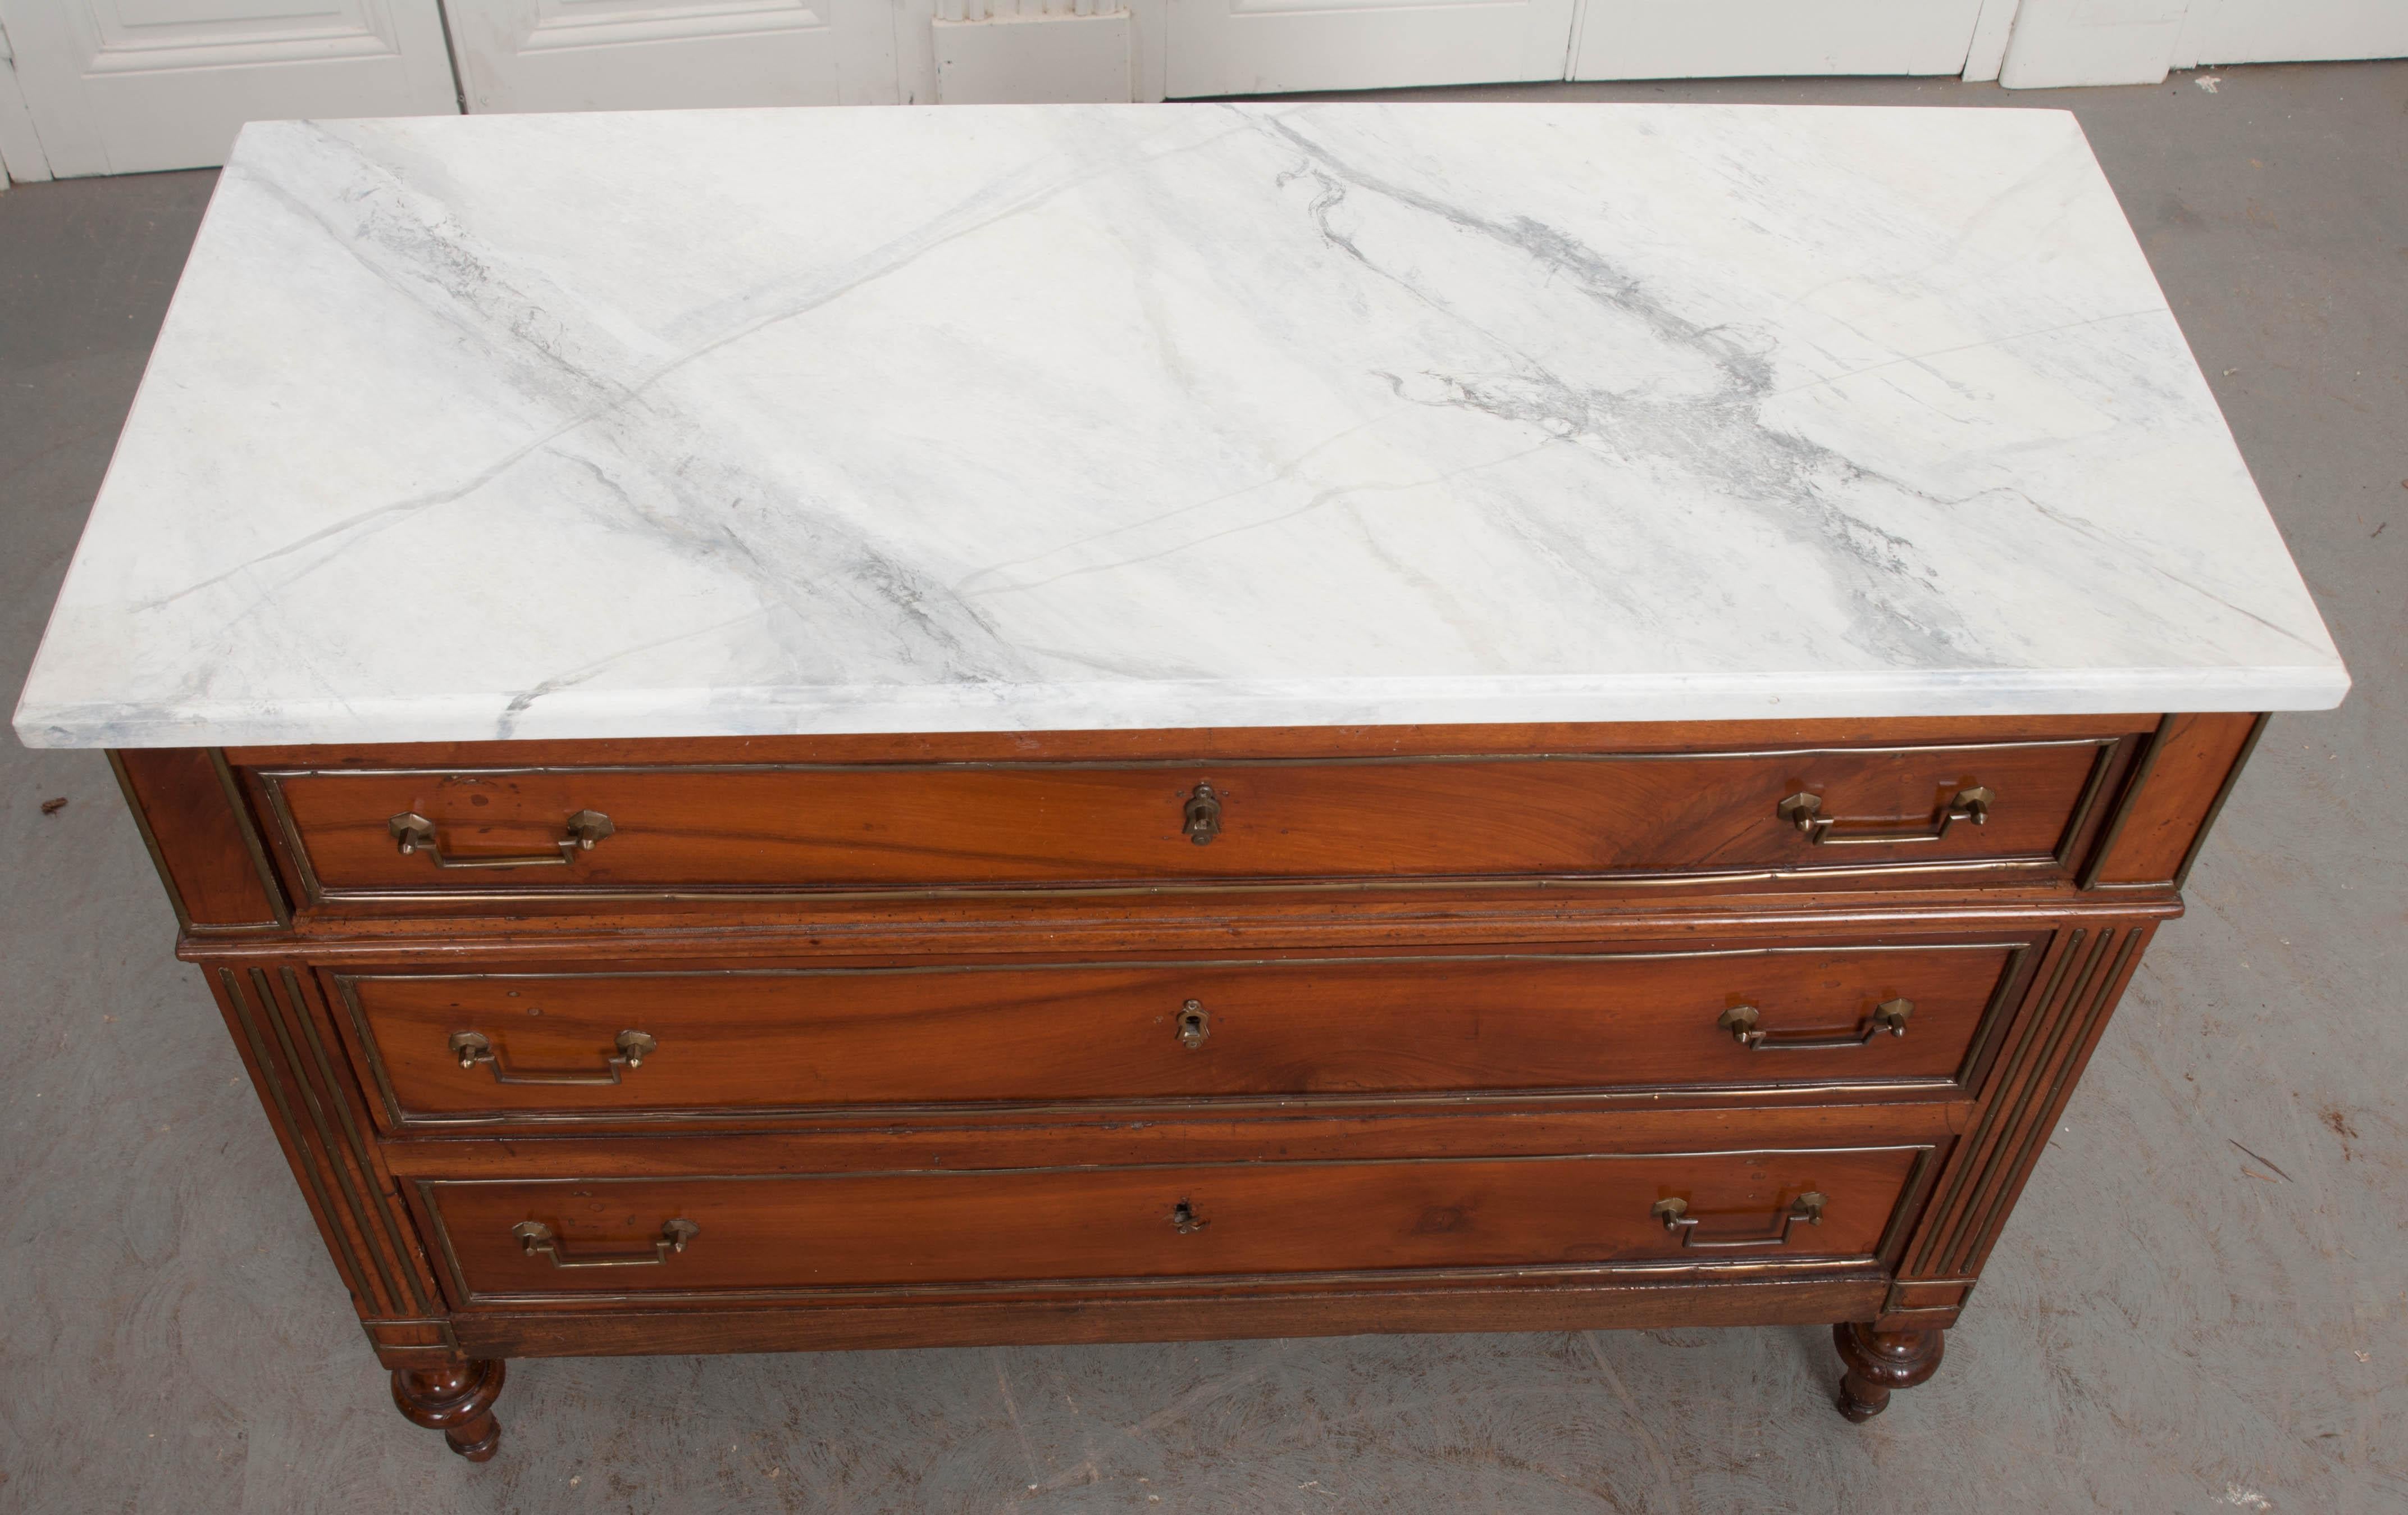 French 19th Century Louis XVI Style Walnut Commode with Faux Marble Top (19. Jahrhundert)